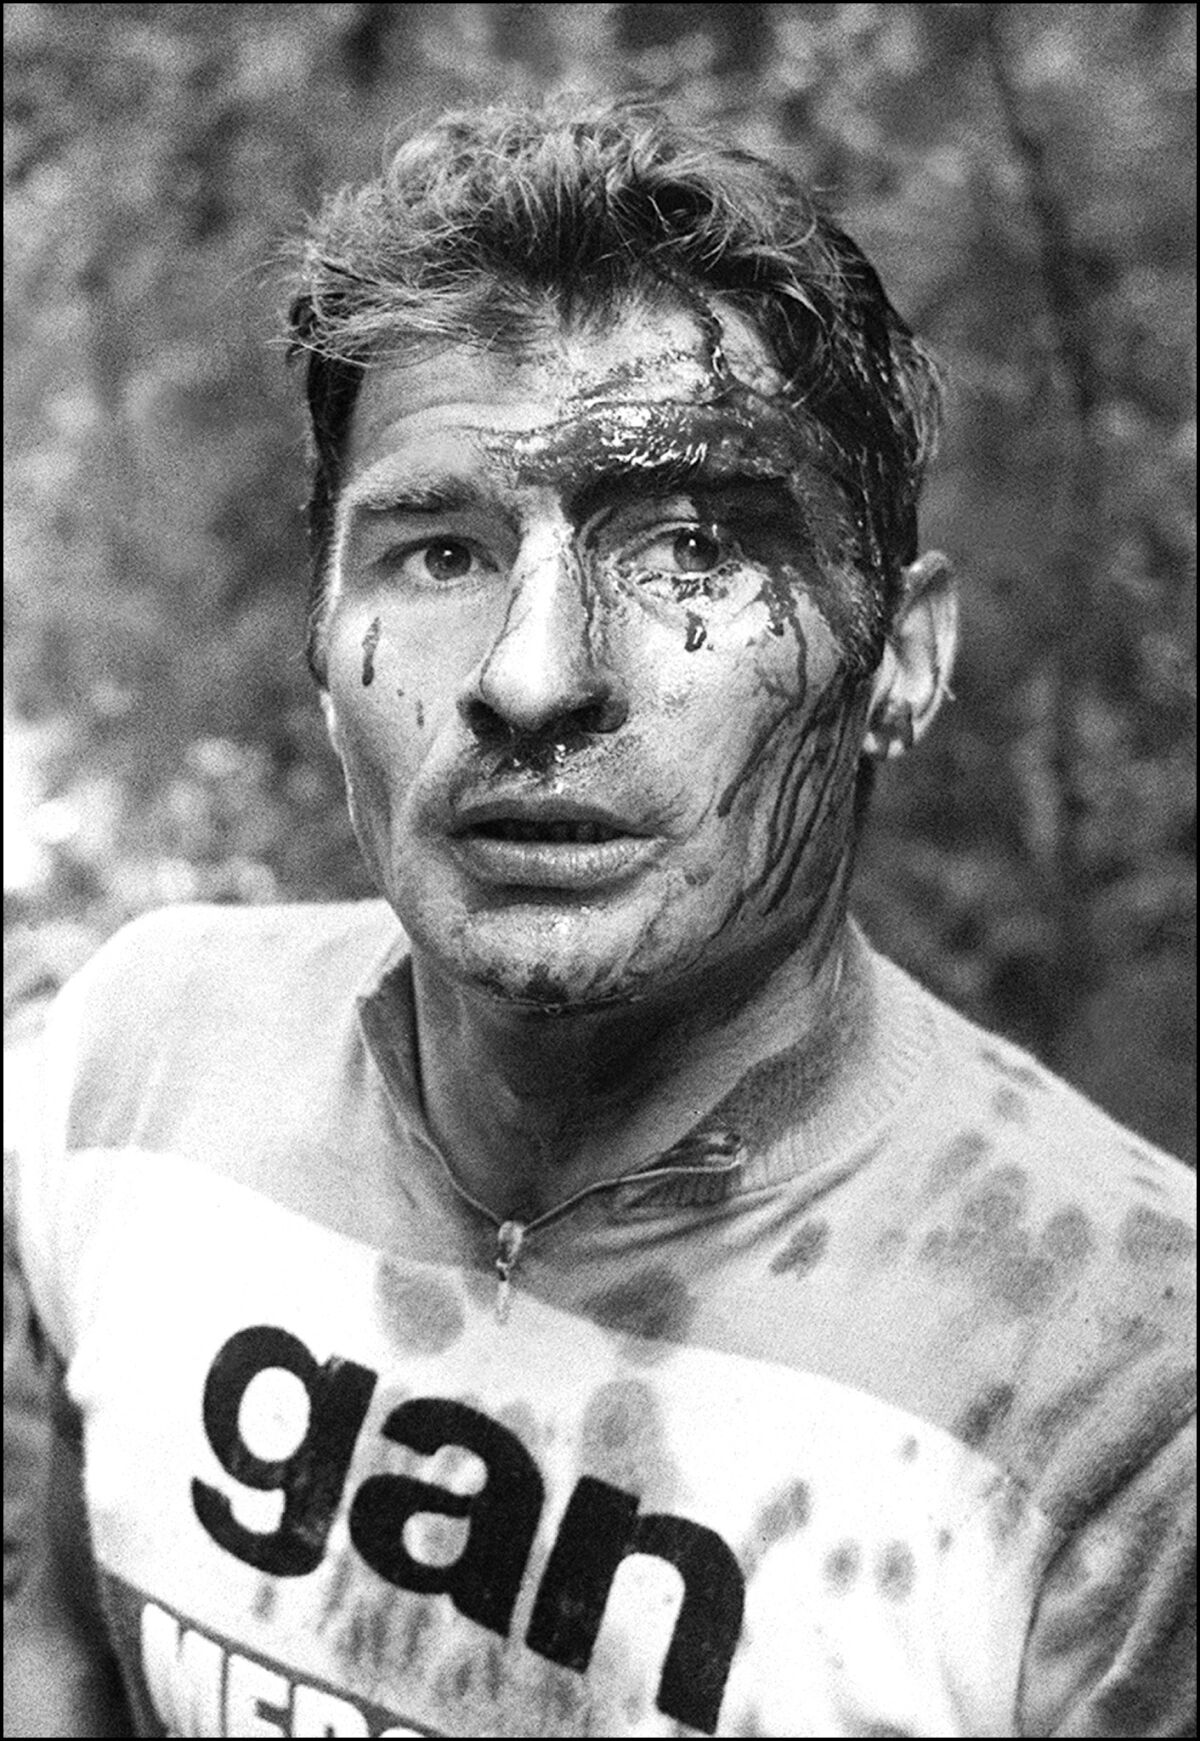 Raymond Poulidor after a fall in 1973 Tour de France